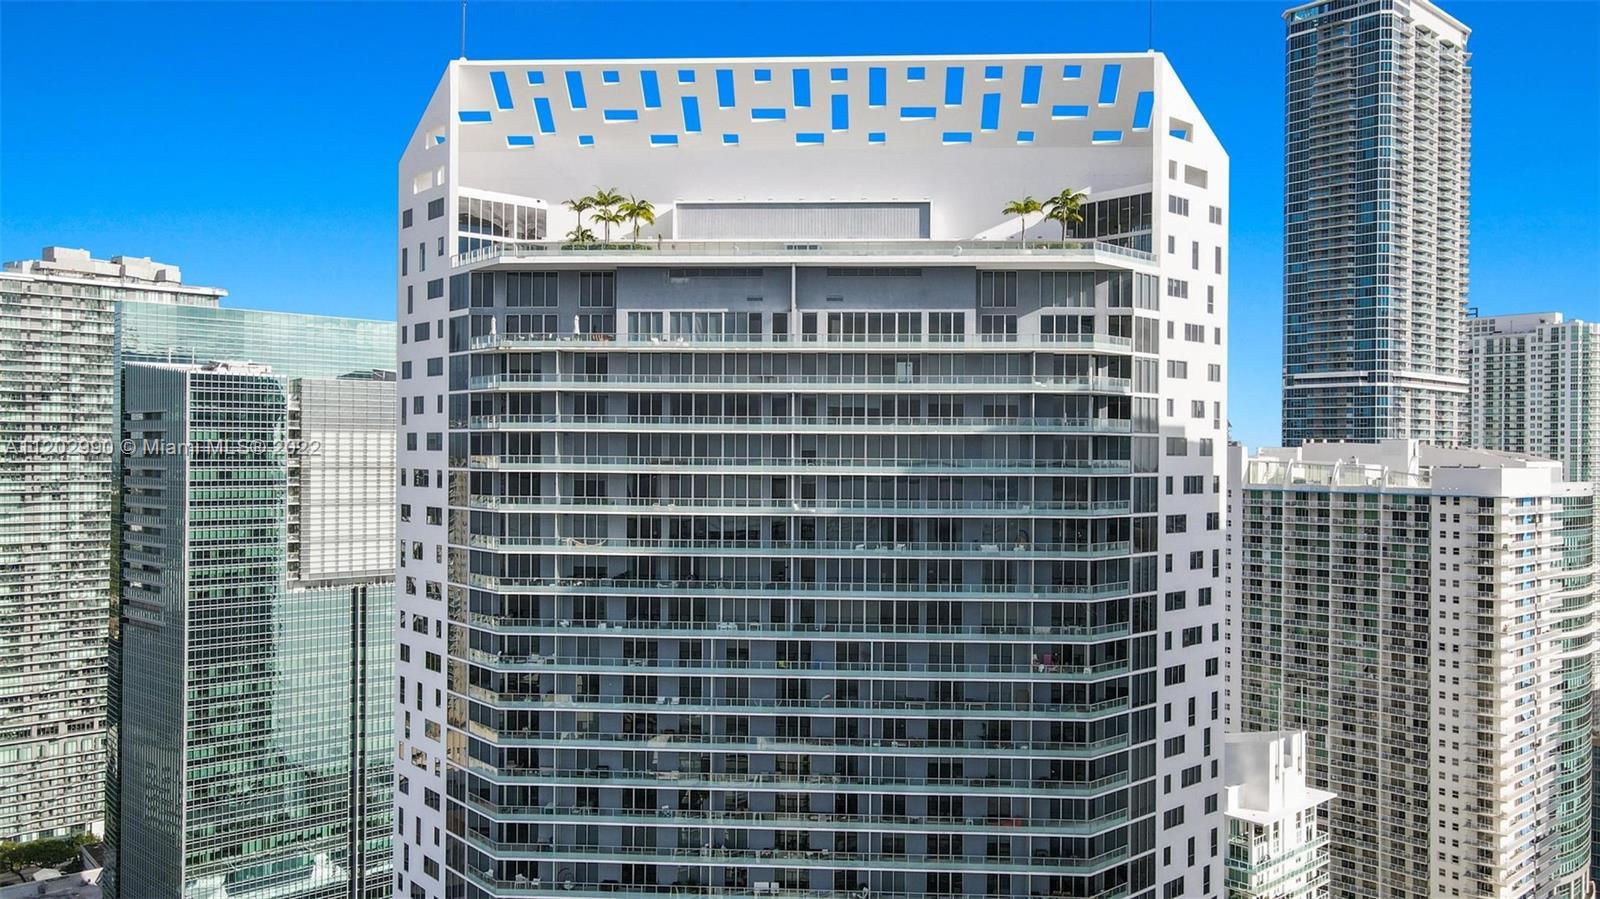 Gorgeous Condominium in one of the desirable buildings at Brickell Bay Dr. 1 Full Bedroom and 1 & 1/